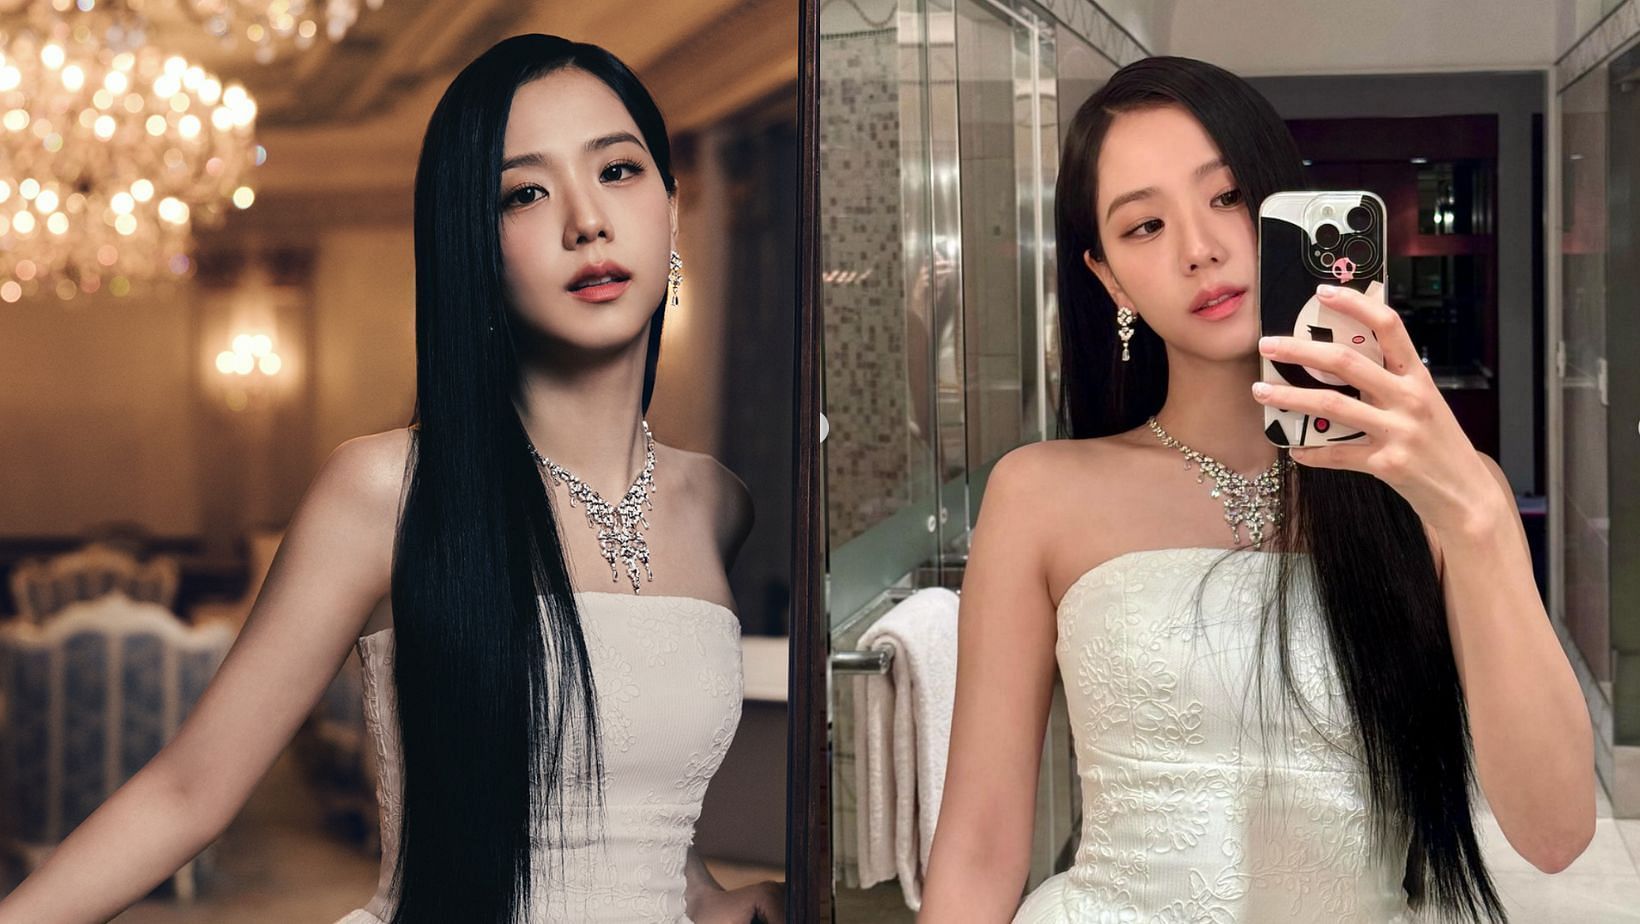 BLACKPINK&rsquo;s Jisoo fronts Cartier&rsquo;s new high jewelry collection. (Images via Instagram/@sooyaaa__)